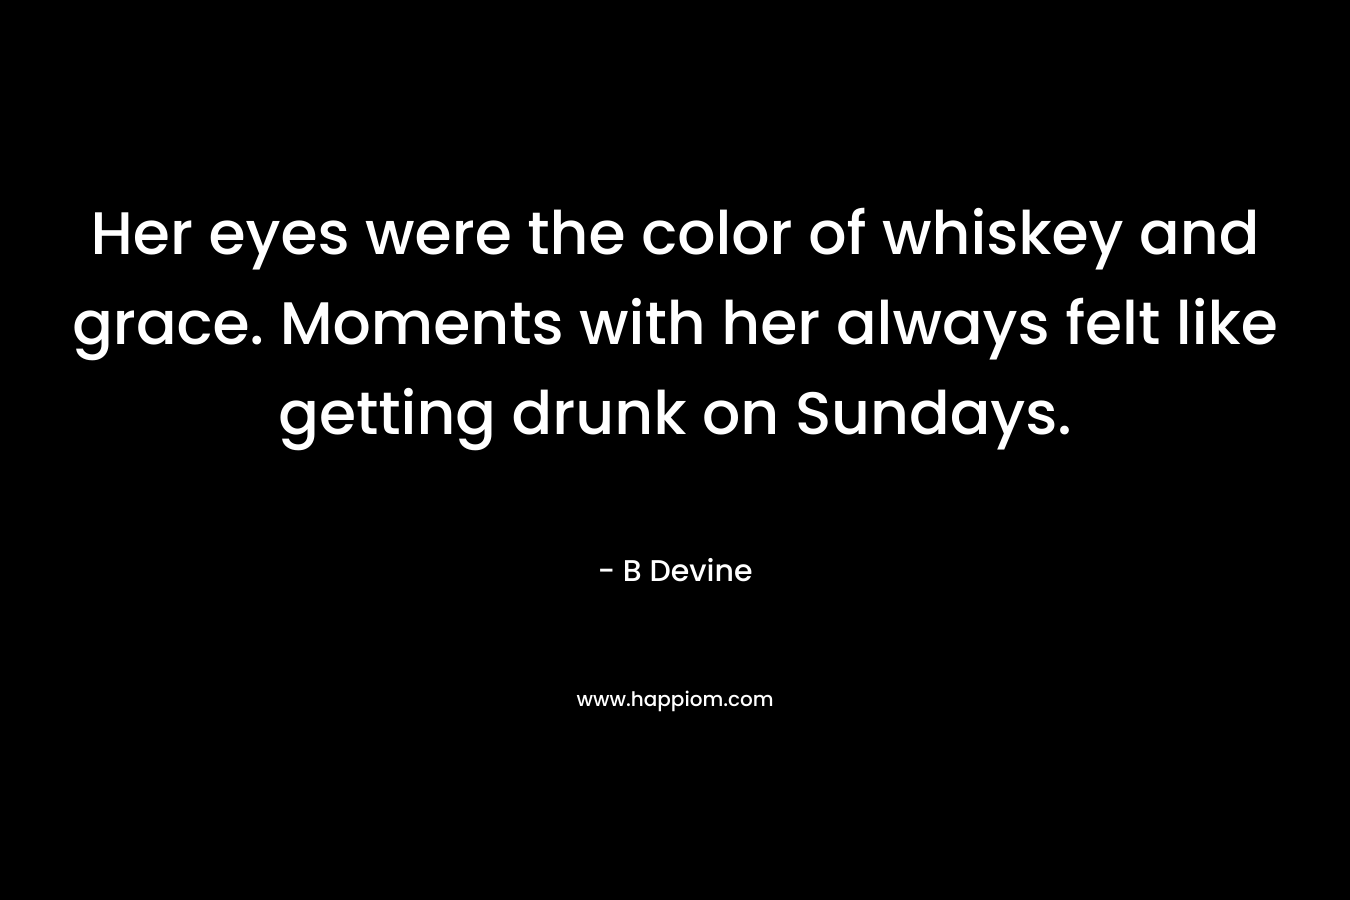 Her eyes were the color of whiskey and grace. Moments with her always felt like getting drunk on Sundays.